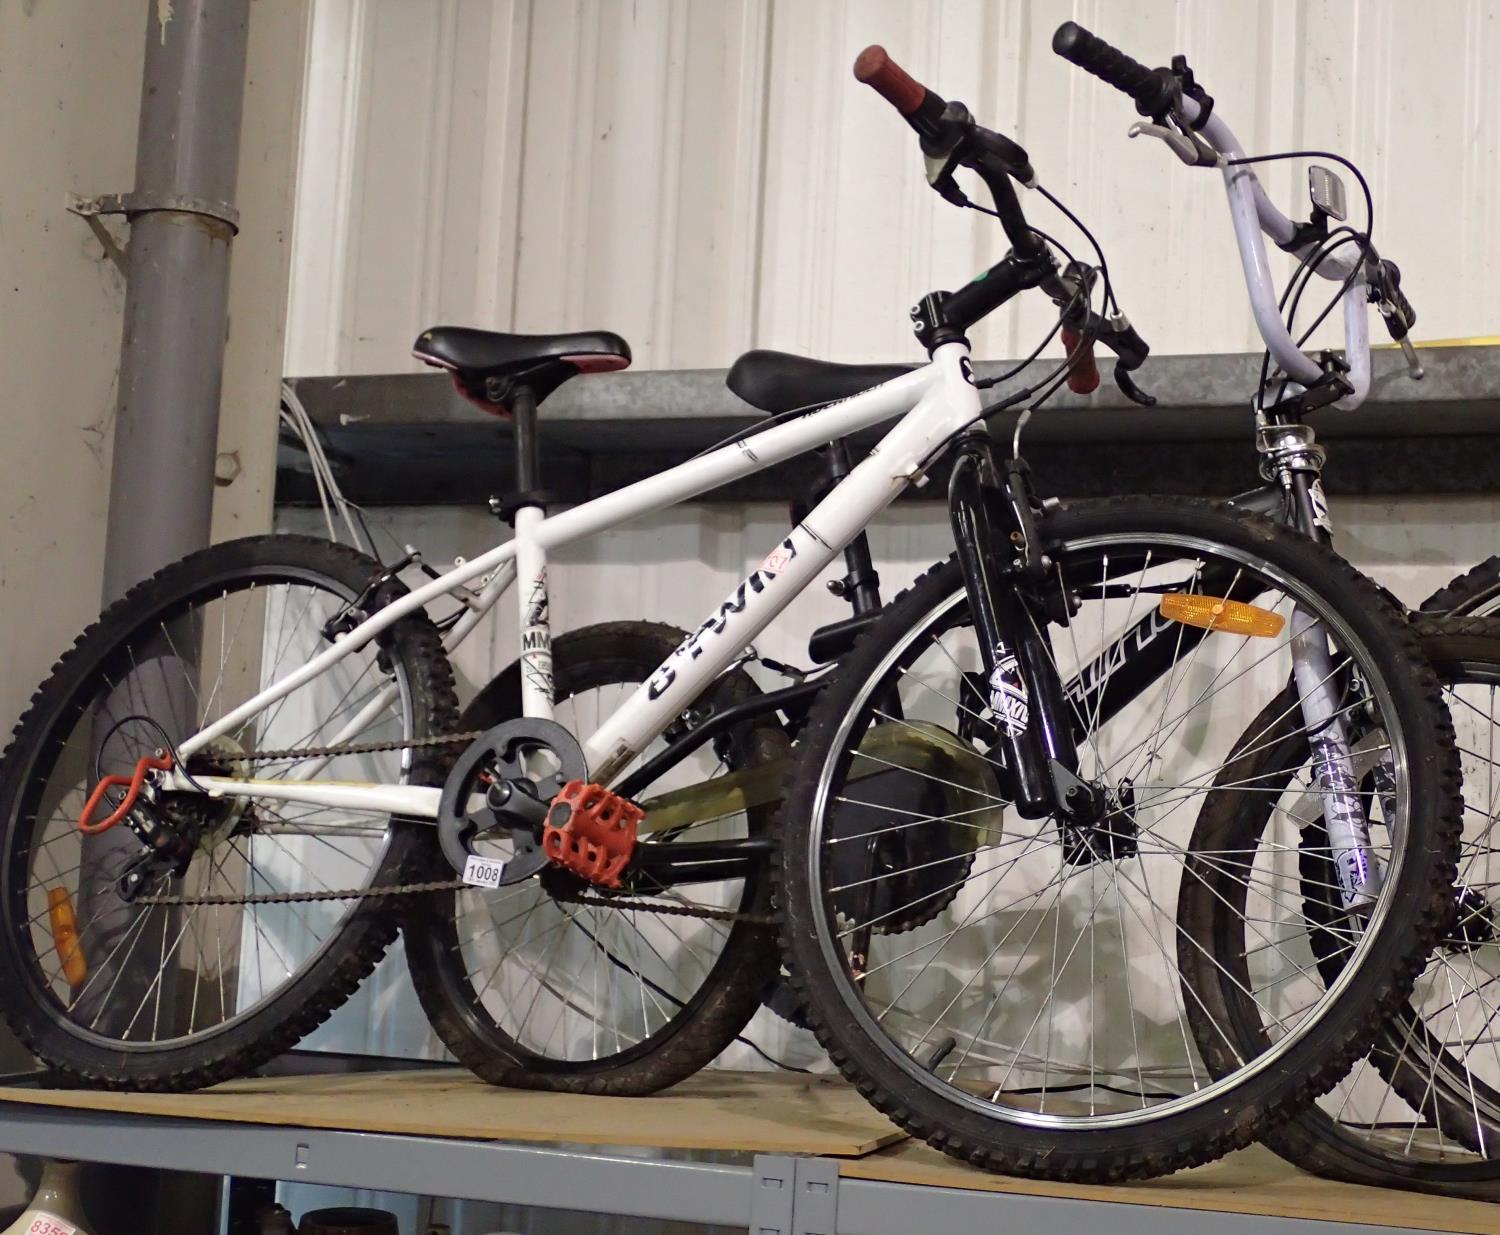 B-Twin Rock Rider 300 childs bike and a Rhino Freefall BMX (2). Not available for in-house P&P